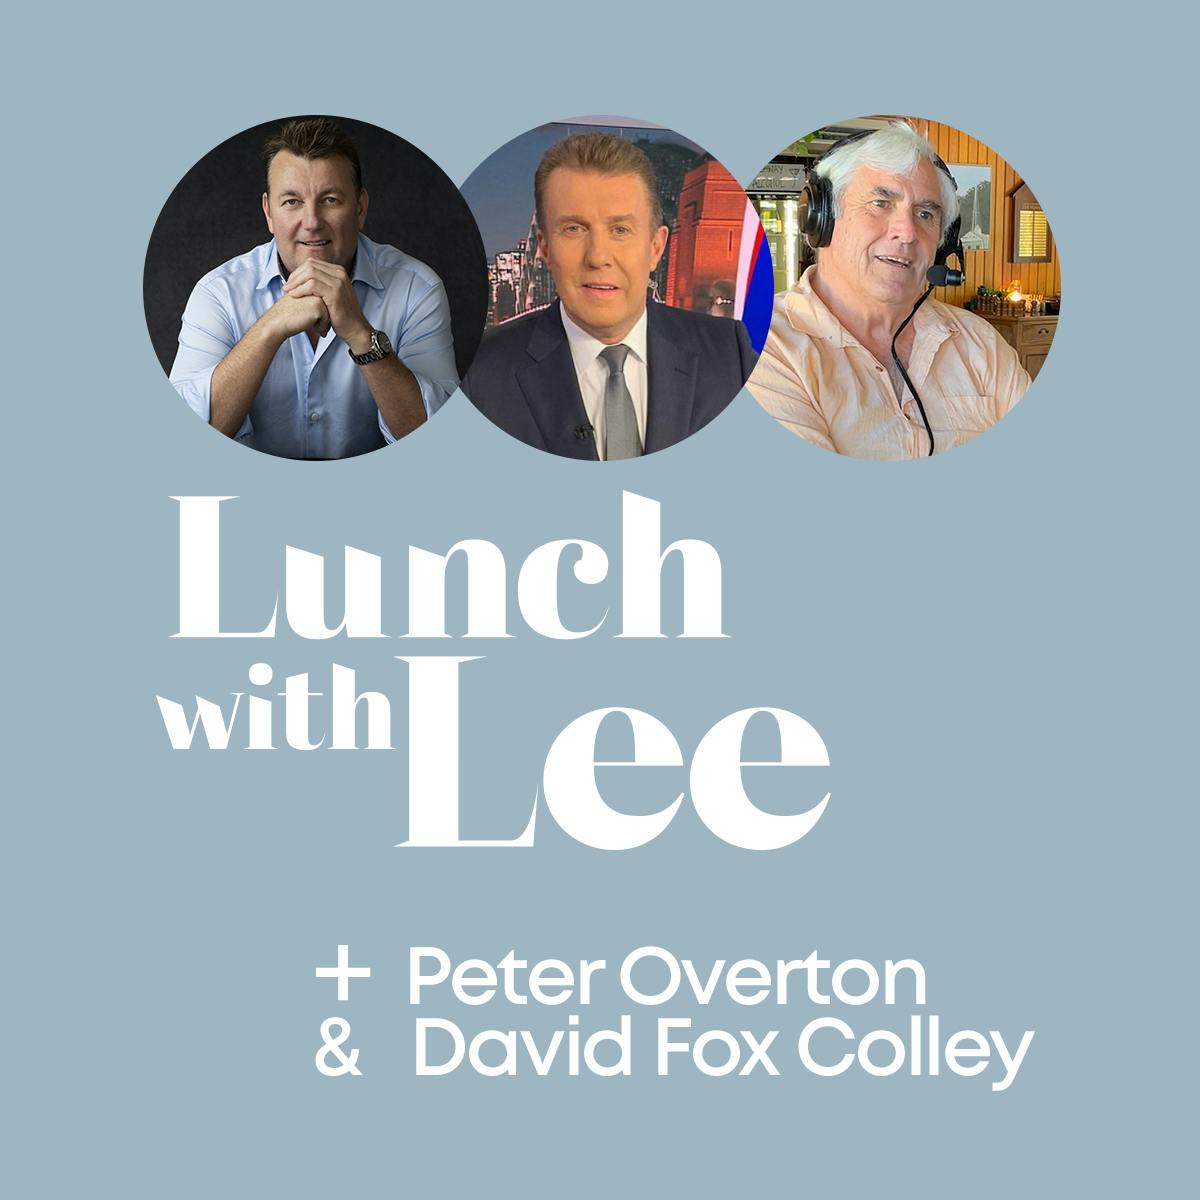 Lunch with Peter Overton and David Fox Colley